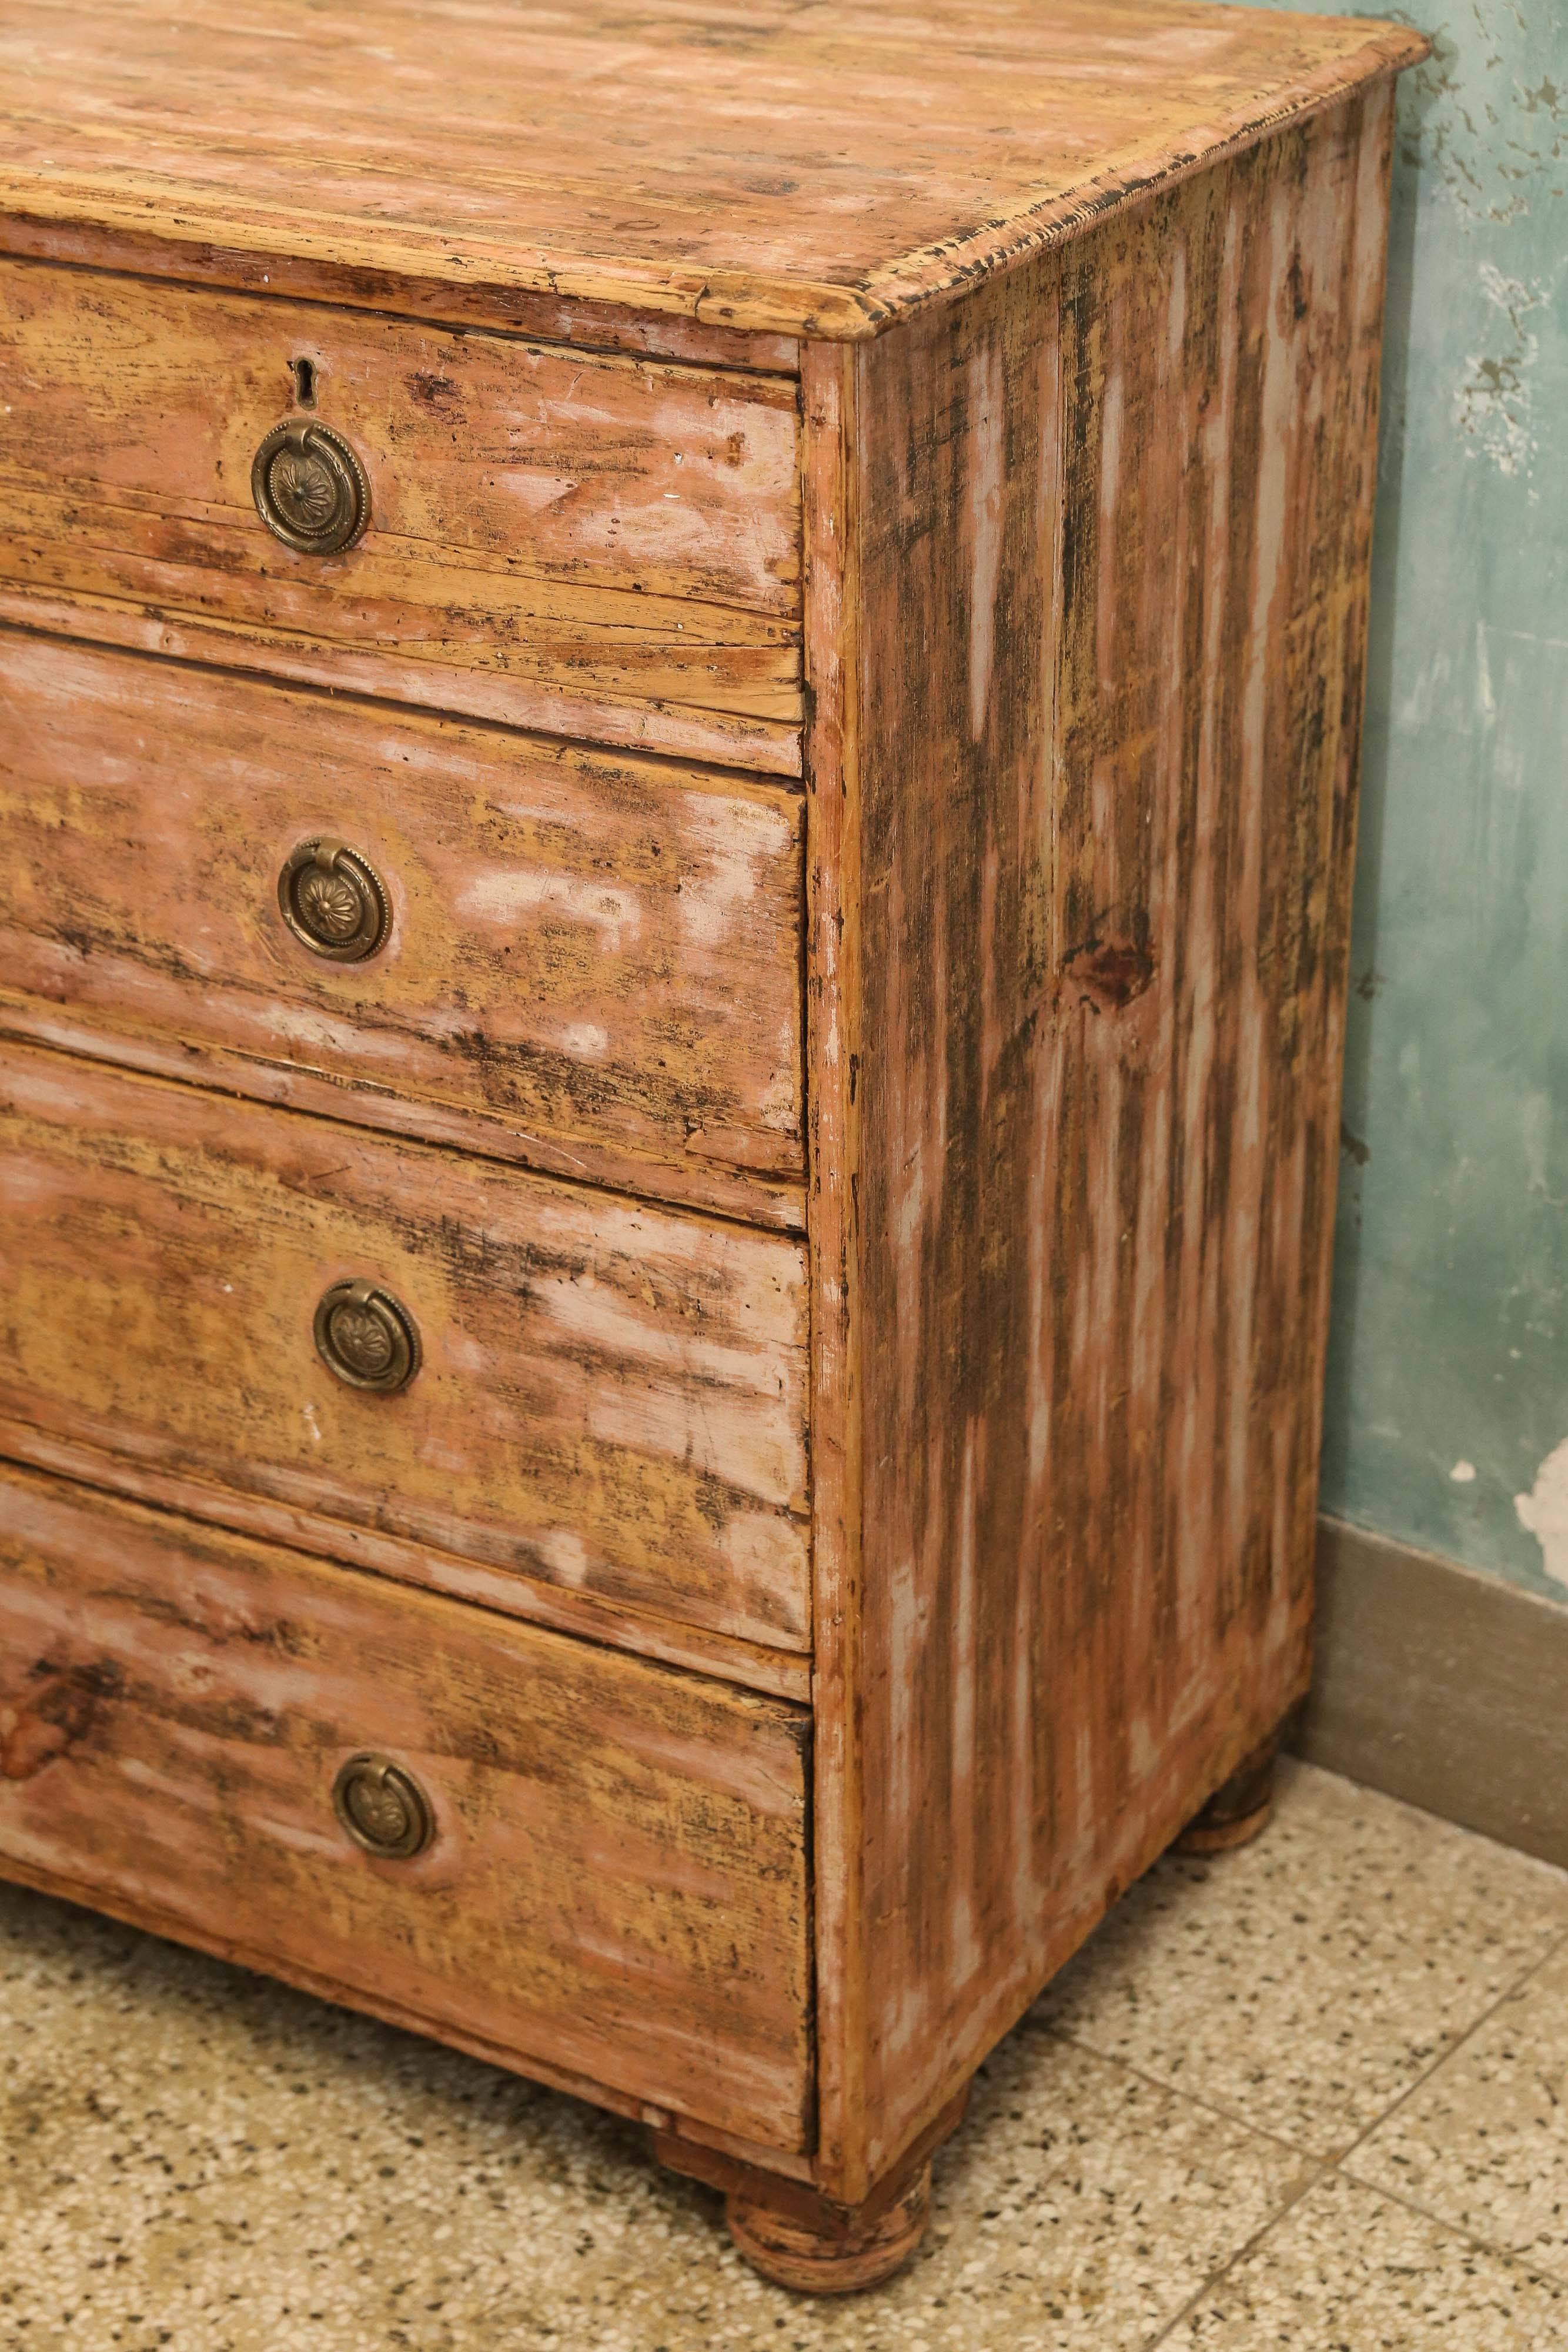 Painted and scraped pine commode in a salmon color with bronze hardware.